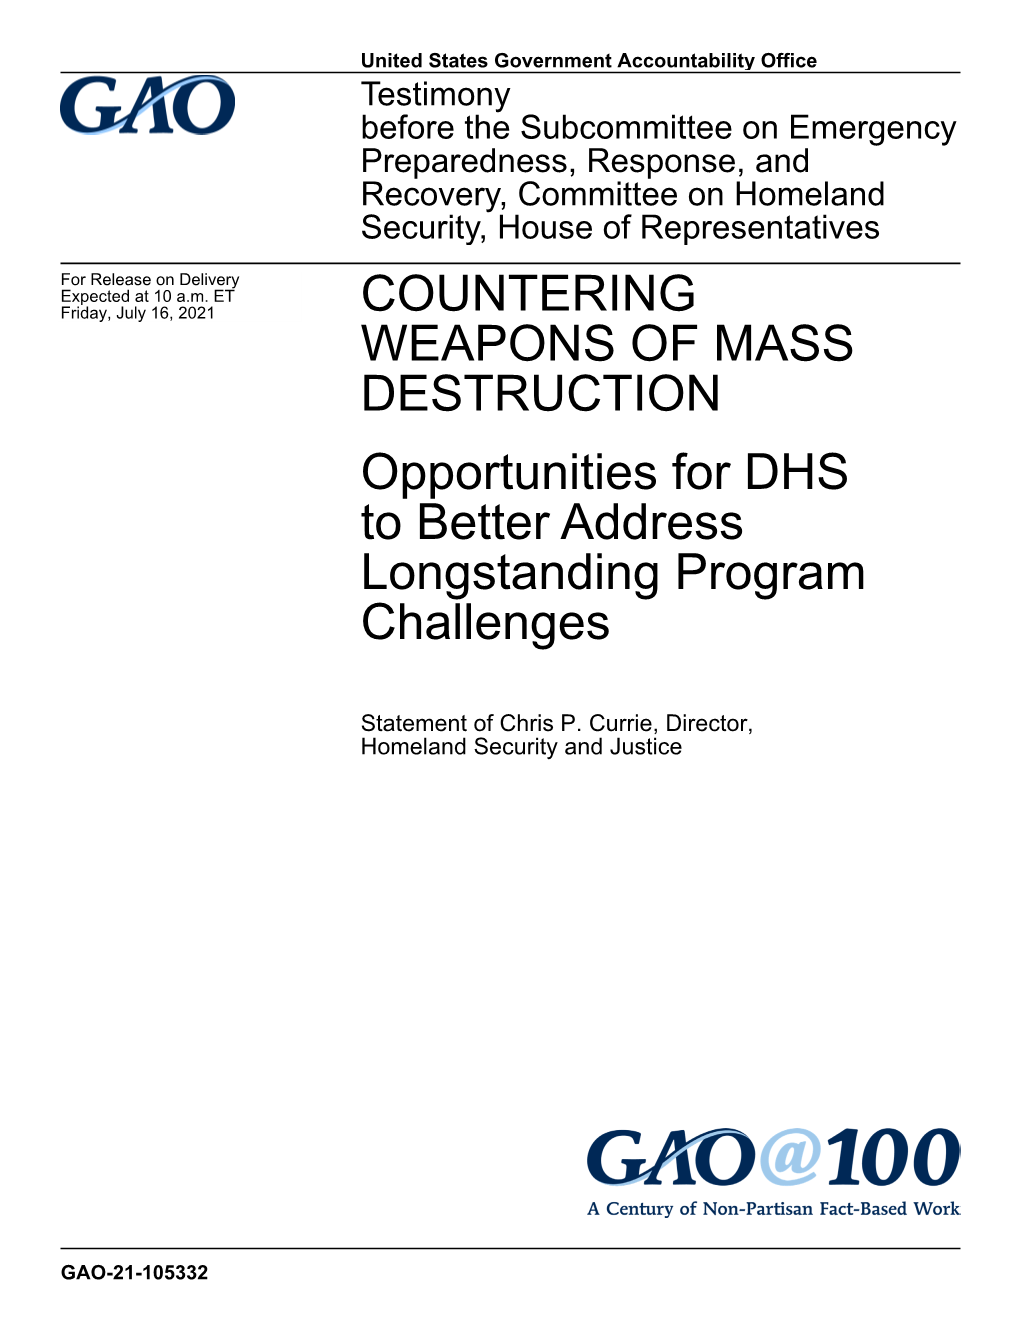 COUNTERING WEAPONS of MASS DESTRUCTION Opportunities for DHS to Better Address Longstanding Program Challenges